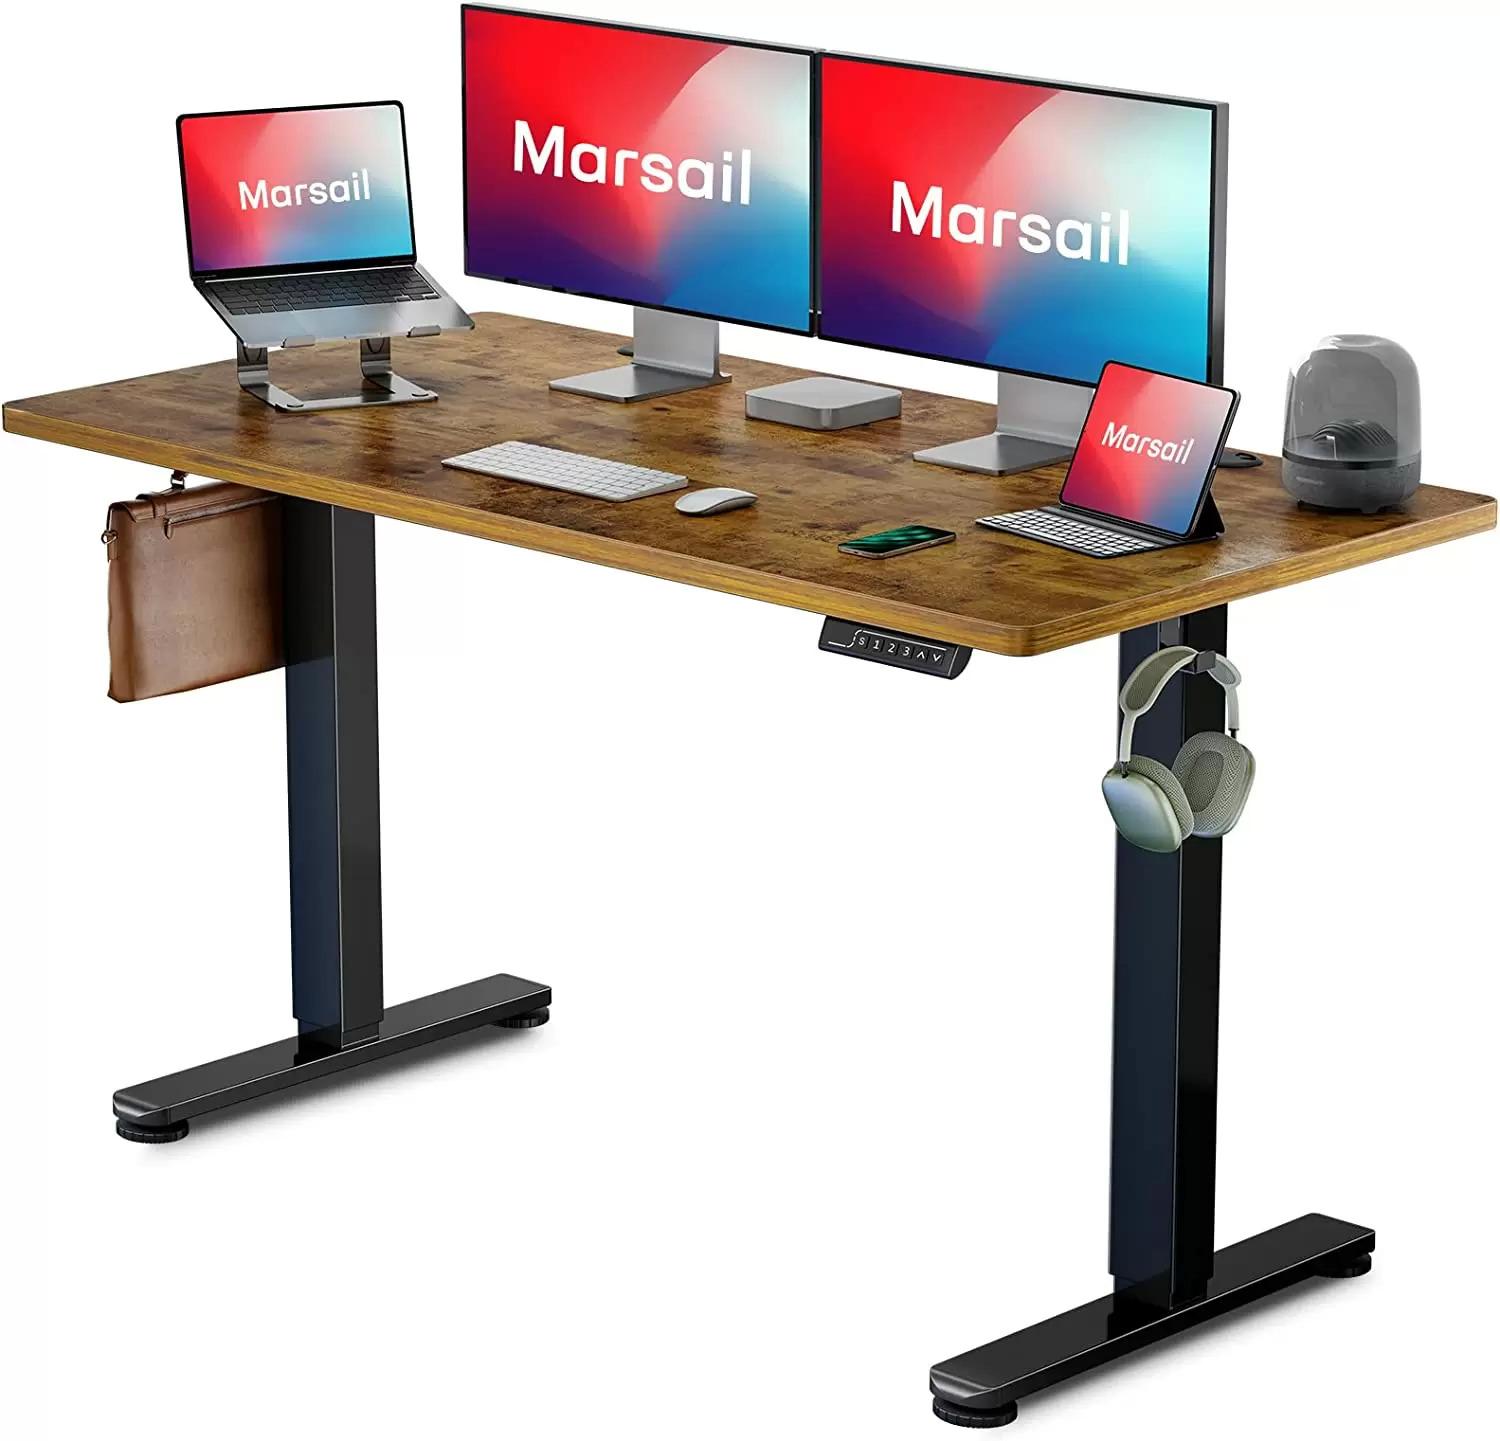 48in Marsail Adjustable Electric Standing Desk for $103.56 Shipped